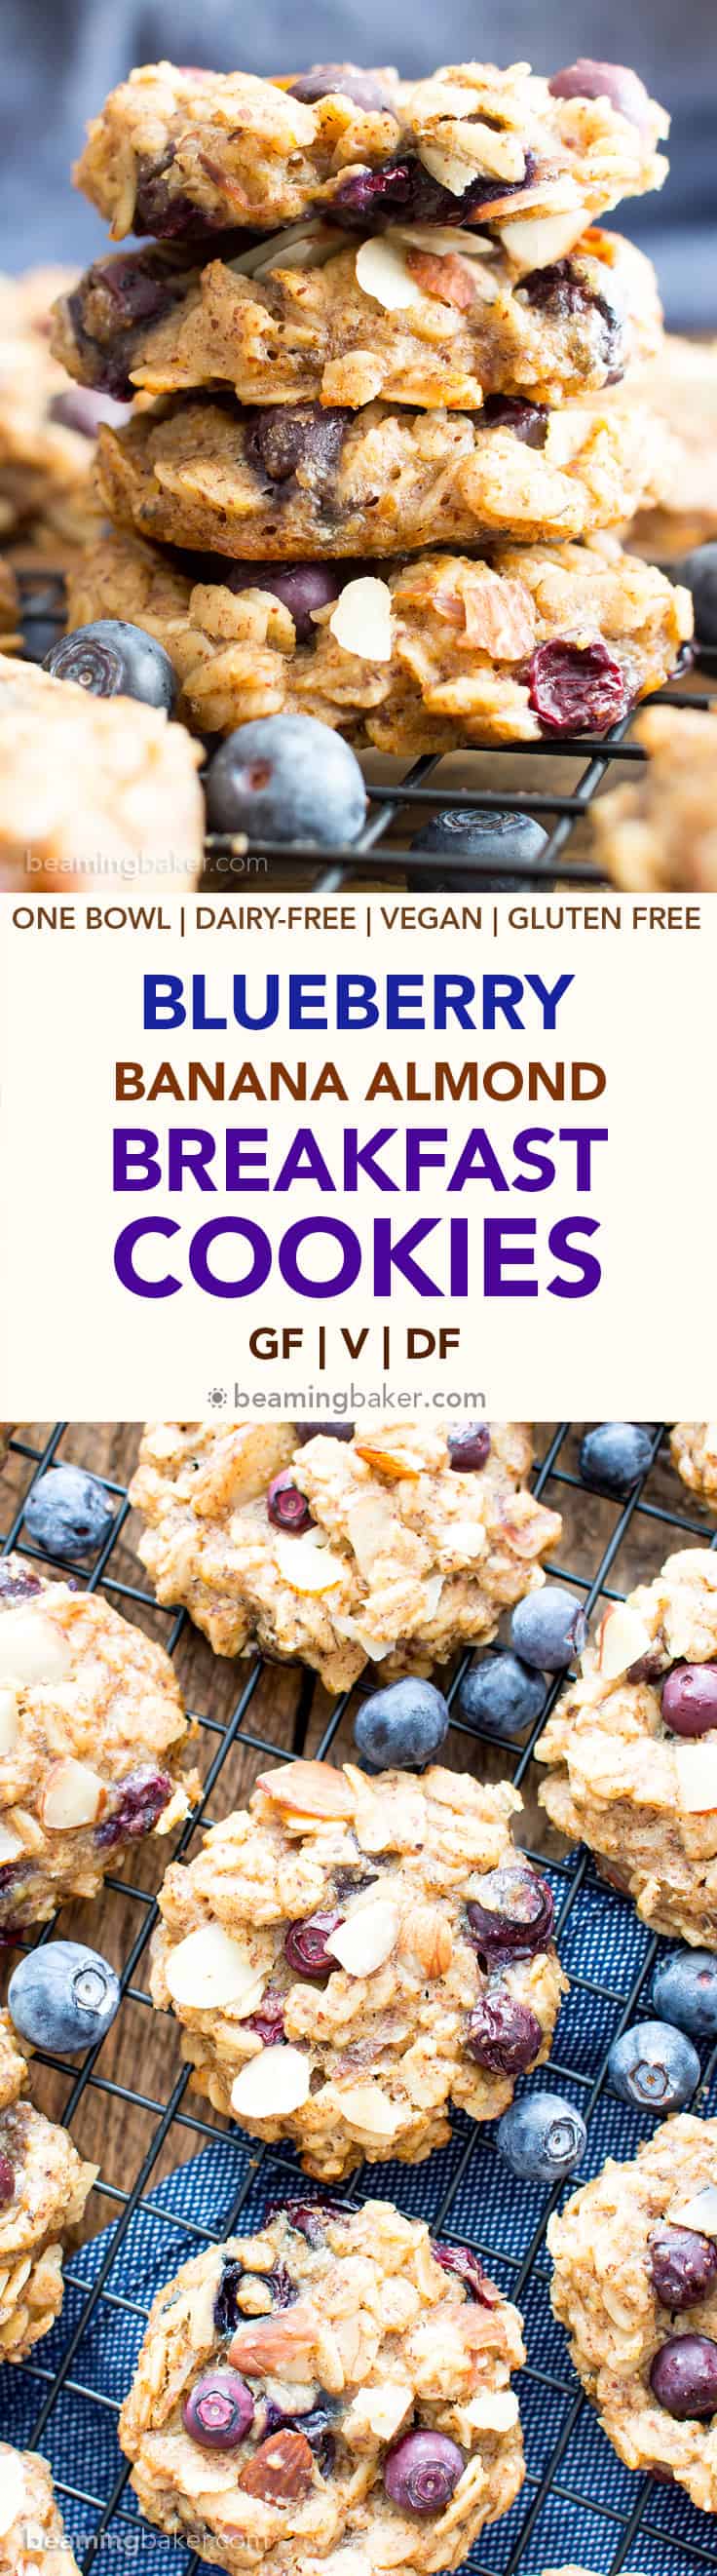 Gluten Free Blueberry Banana Almond Breakfast Cookies (V, GF): a one bowl recipe for delightfully chewy banana breakfast cookies bursting with juicy blueberries and crunchy almonds. #Vegan #GlutenFree #DairyFree #Cookies #Breakfast #Blueberries | Recipe on BeamingBaker.com 